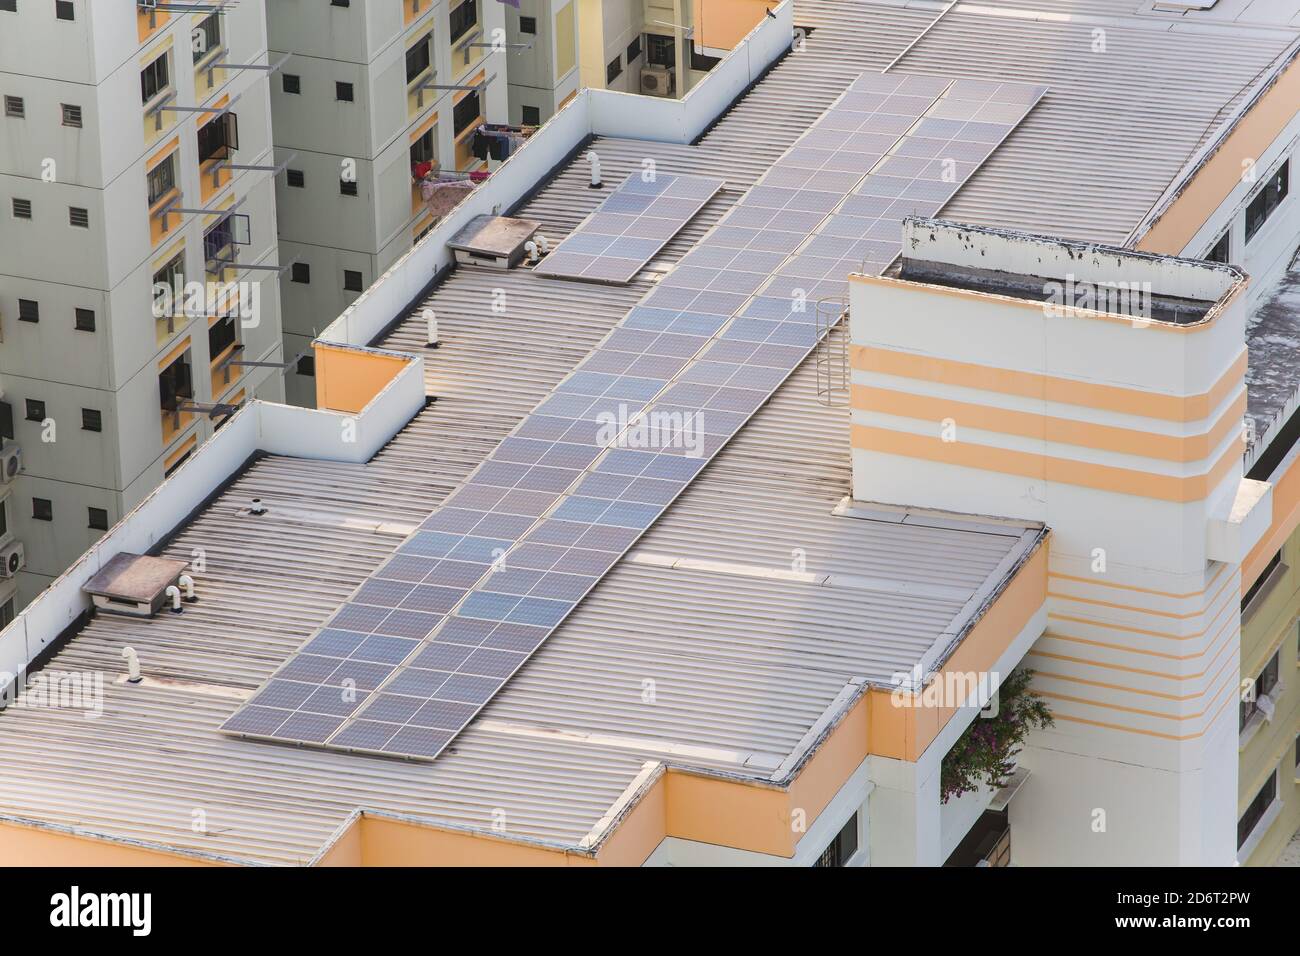 Solar panels are installed on top of modern housing estate, Singapore. Stock Photo